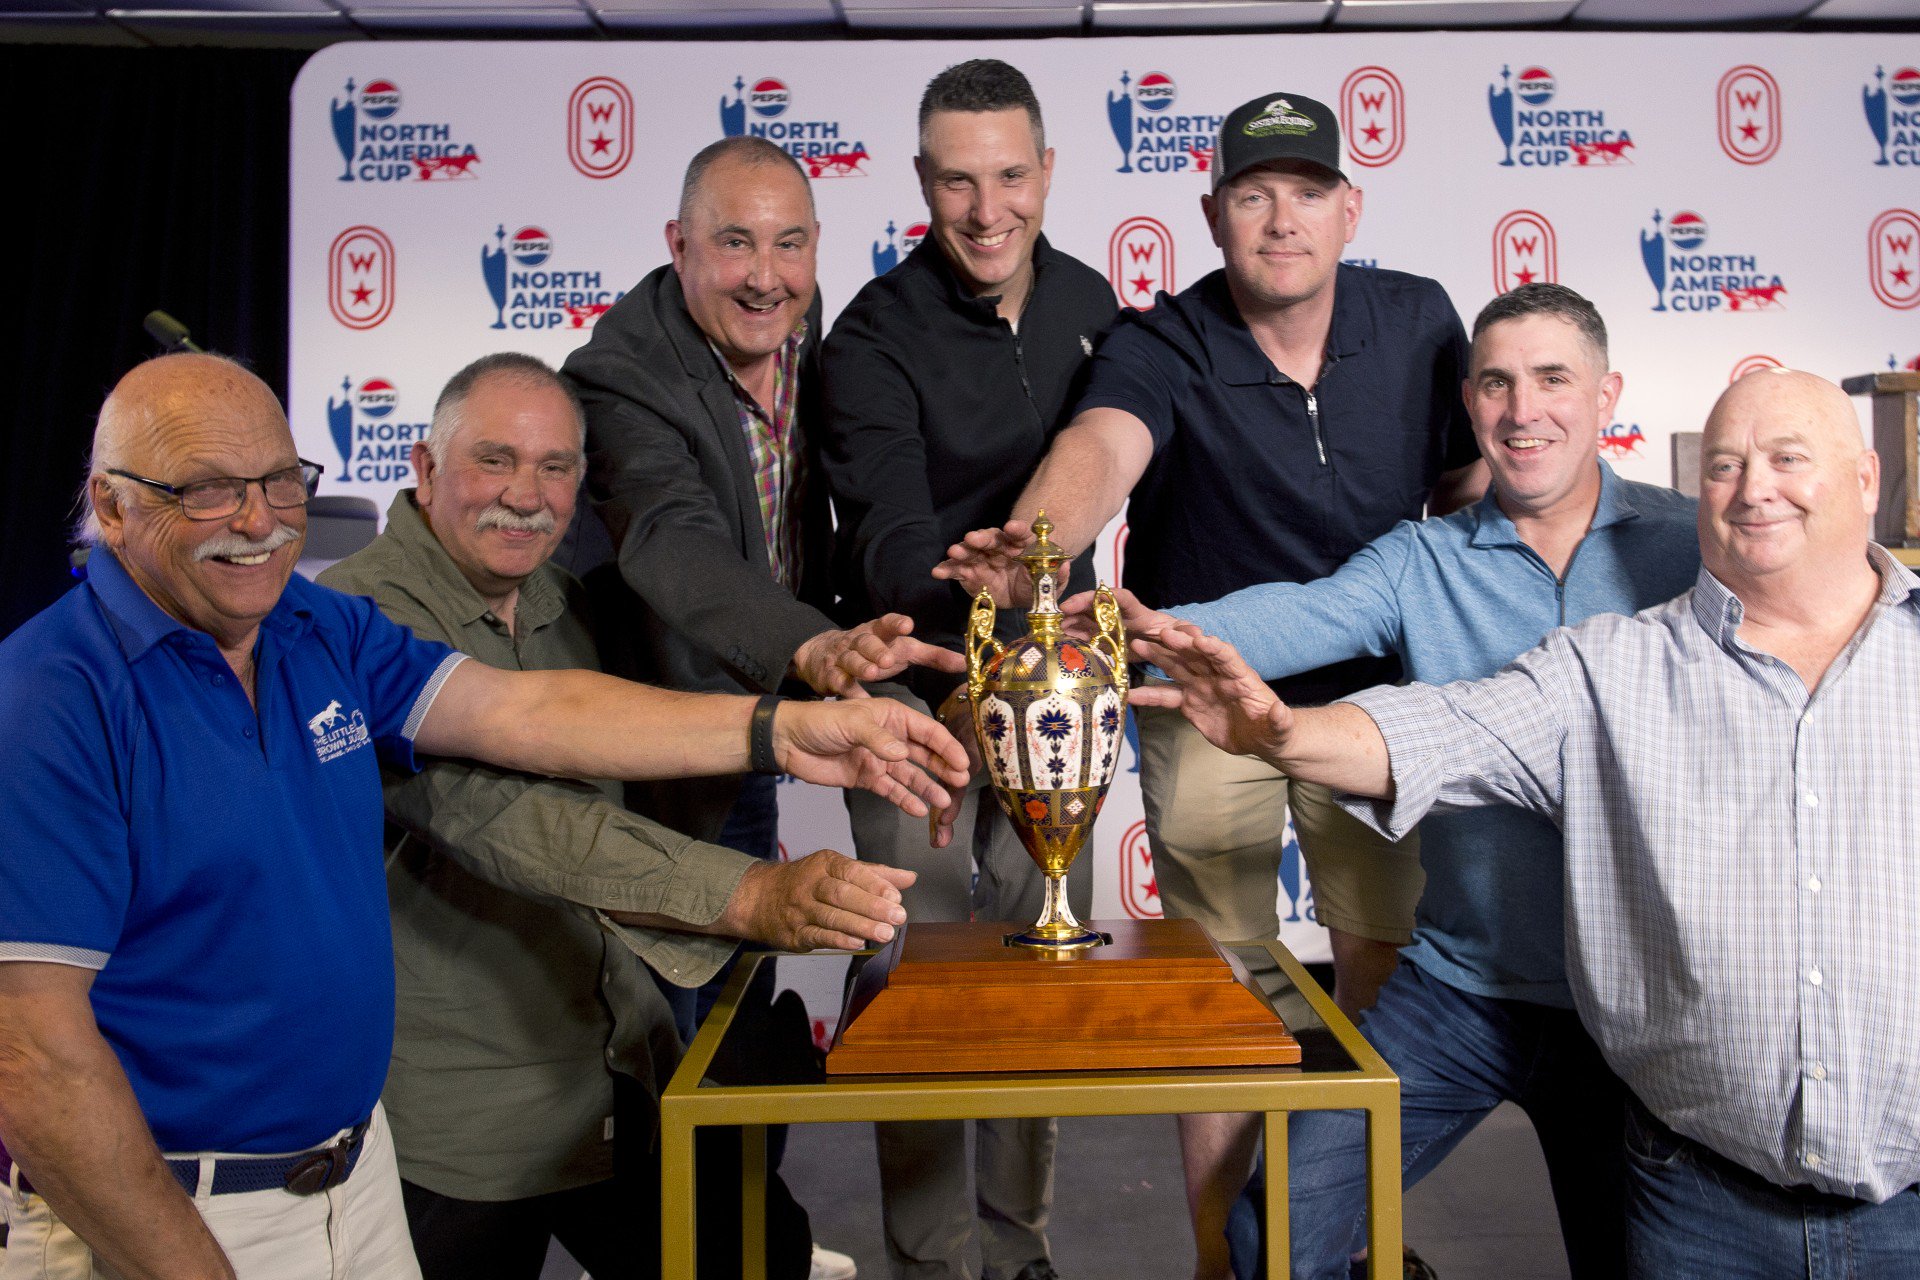 Left to right - Dr. Ian Moore, Ron MacDonald, Sylvain Filion, James MacDonald, Jody Jamieson, Anthony Beaton and Herb Holland pose with the North America Cup trophy. (Michael Burns Photo)